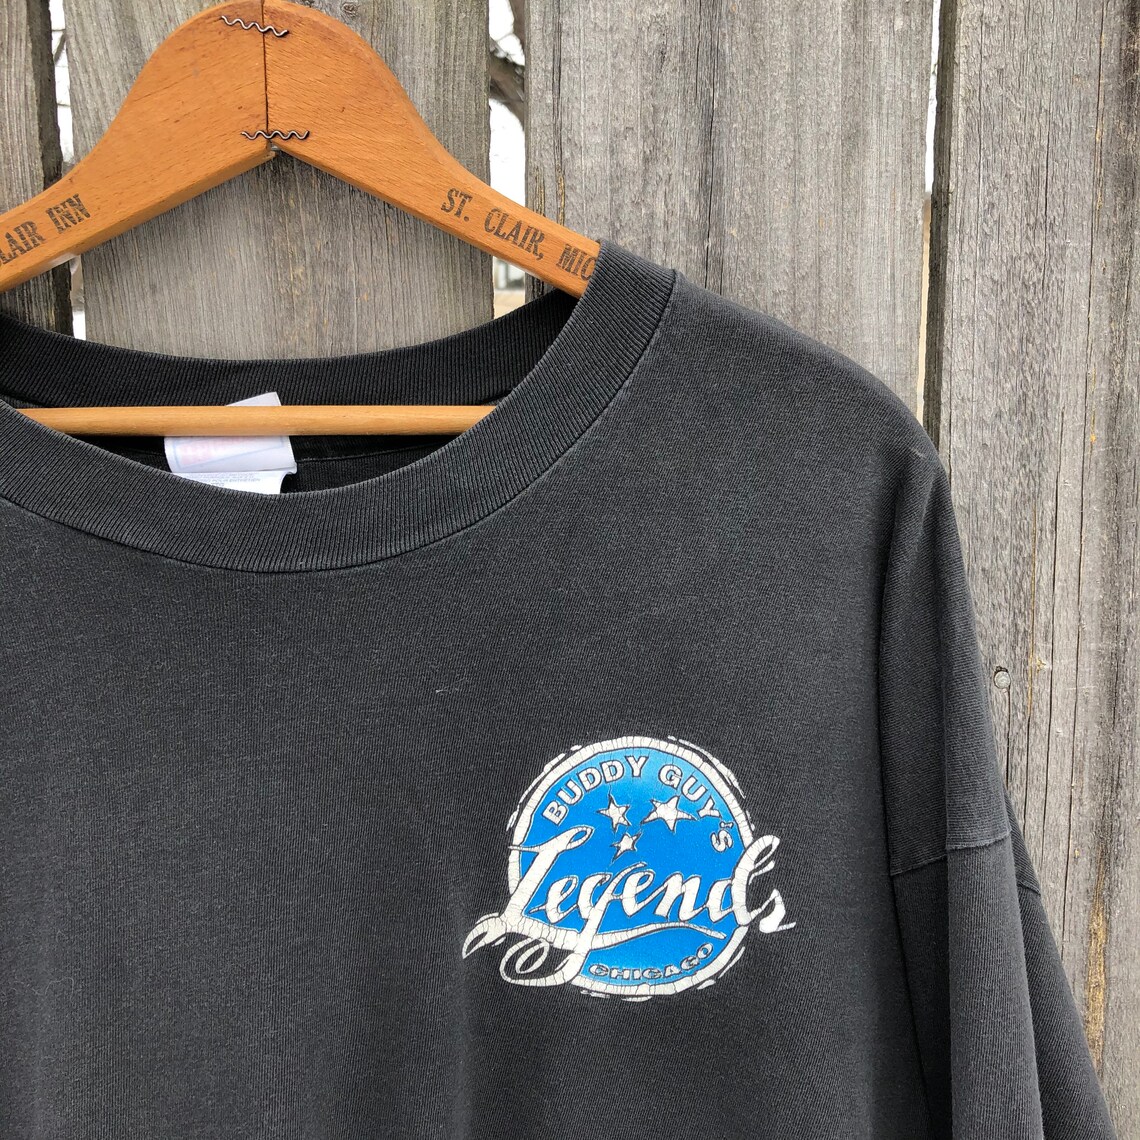 1990s Vintage Buddy Guy Long Sleeve T-shirt From Legends - Etsy